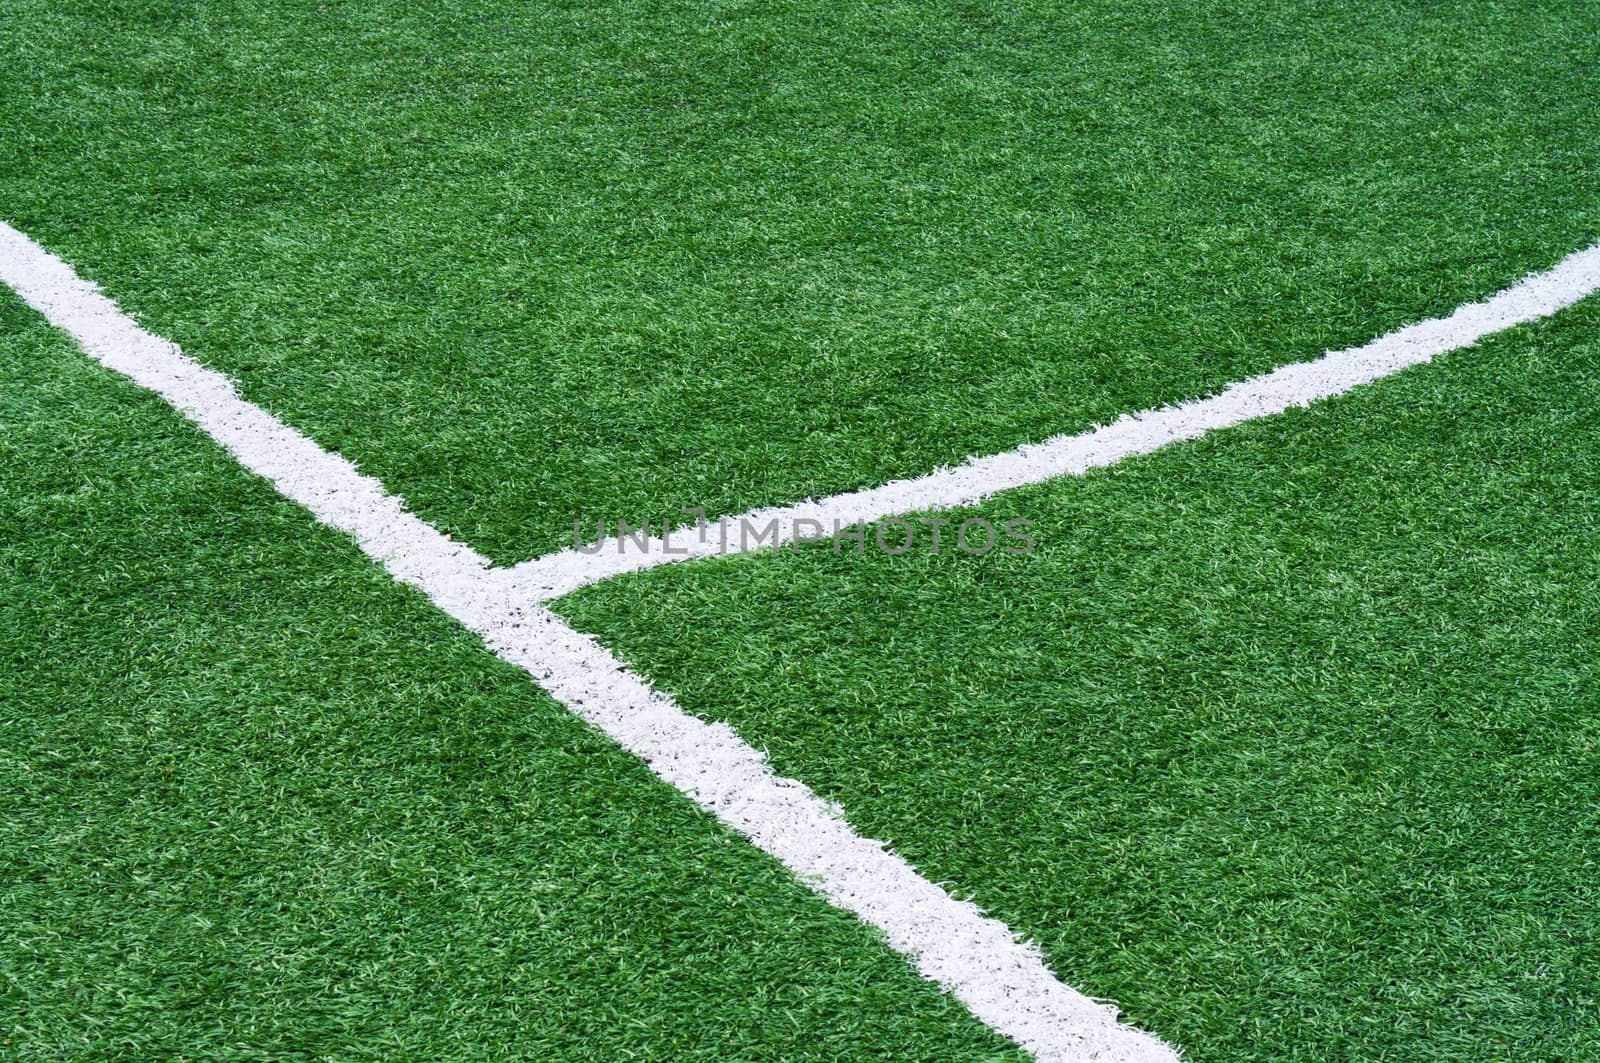 Part of a football field with marking.